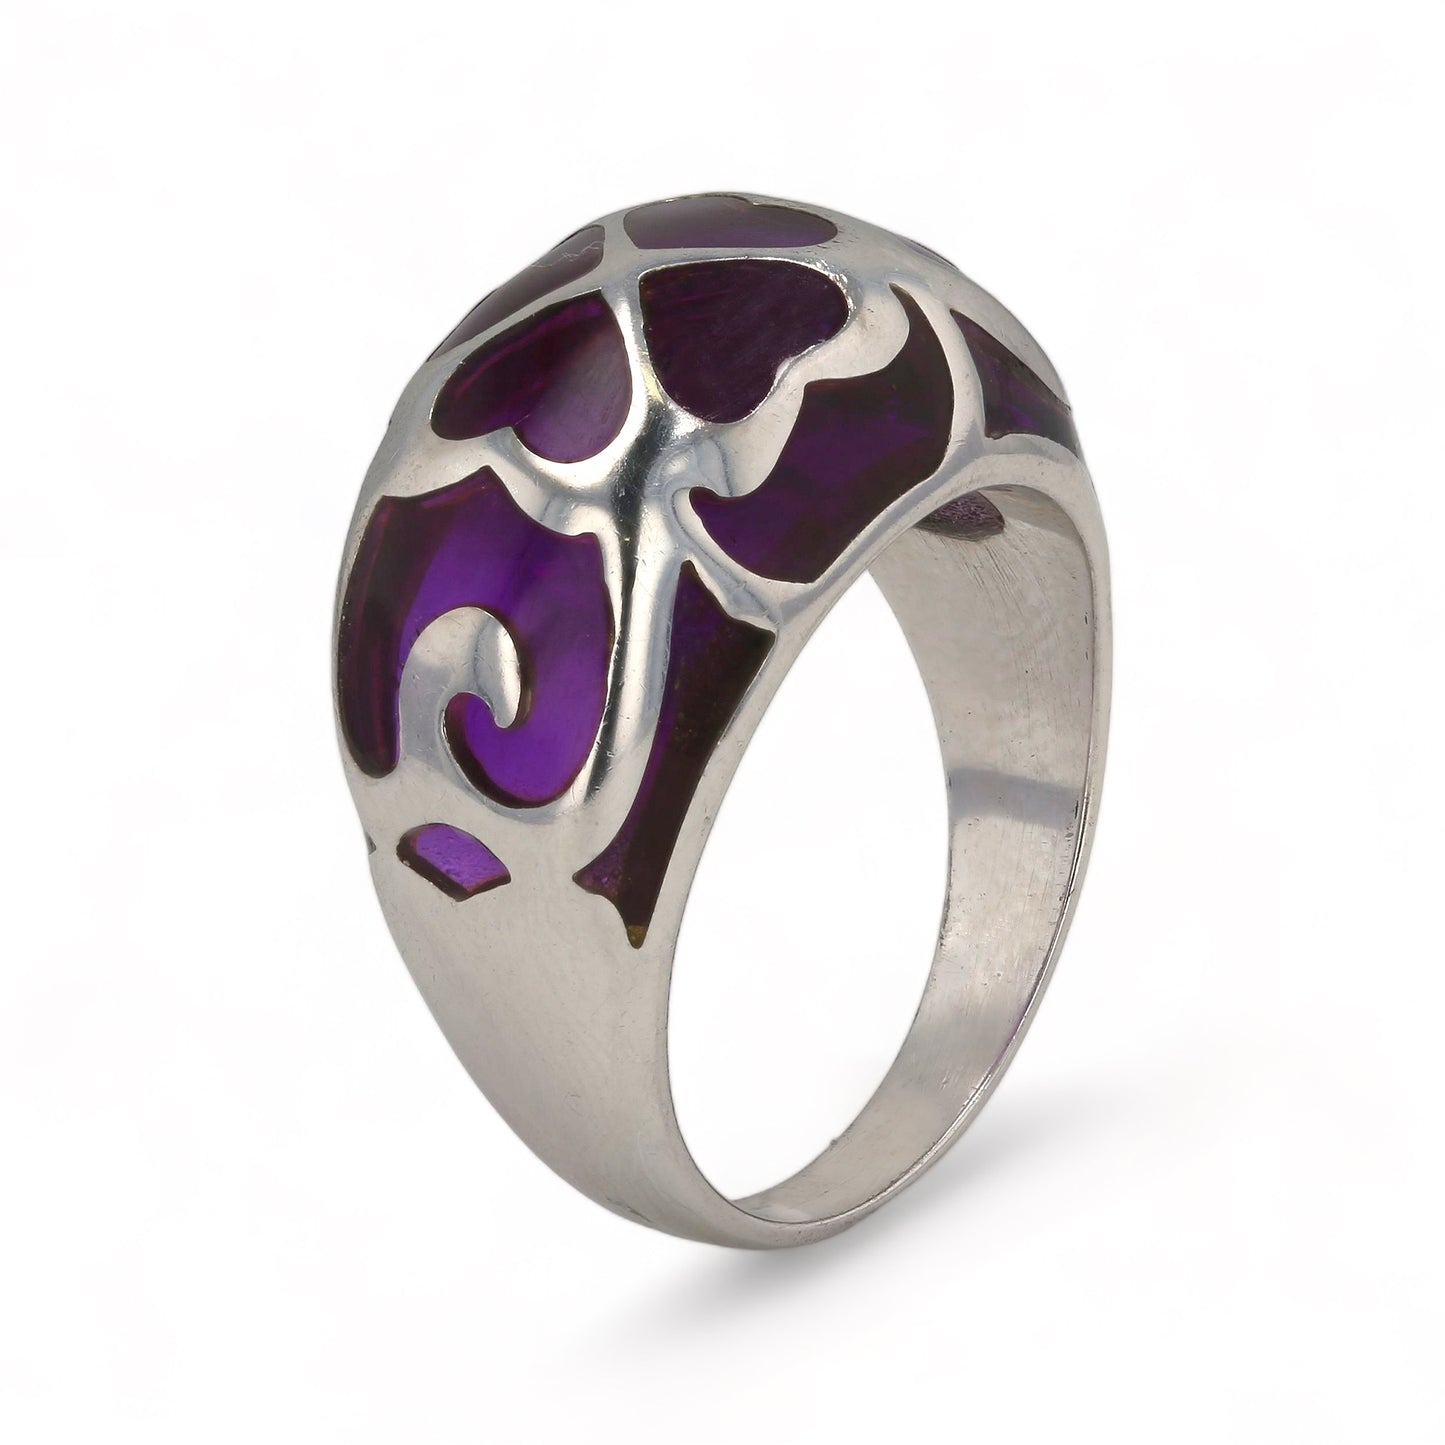 Luxury clover sterling silver 925 purple clover ring unique piece-528368